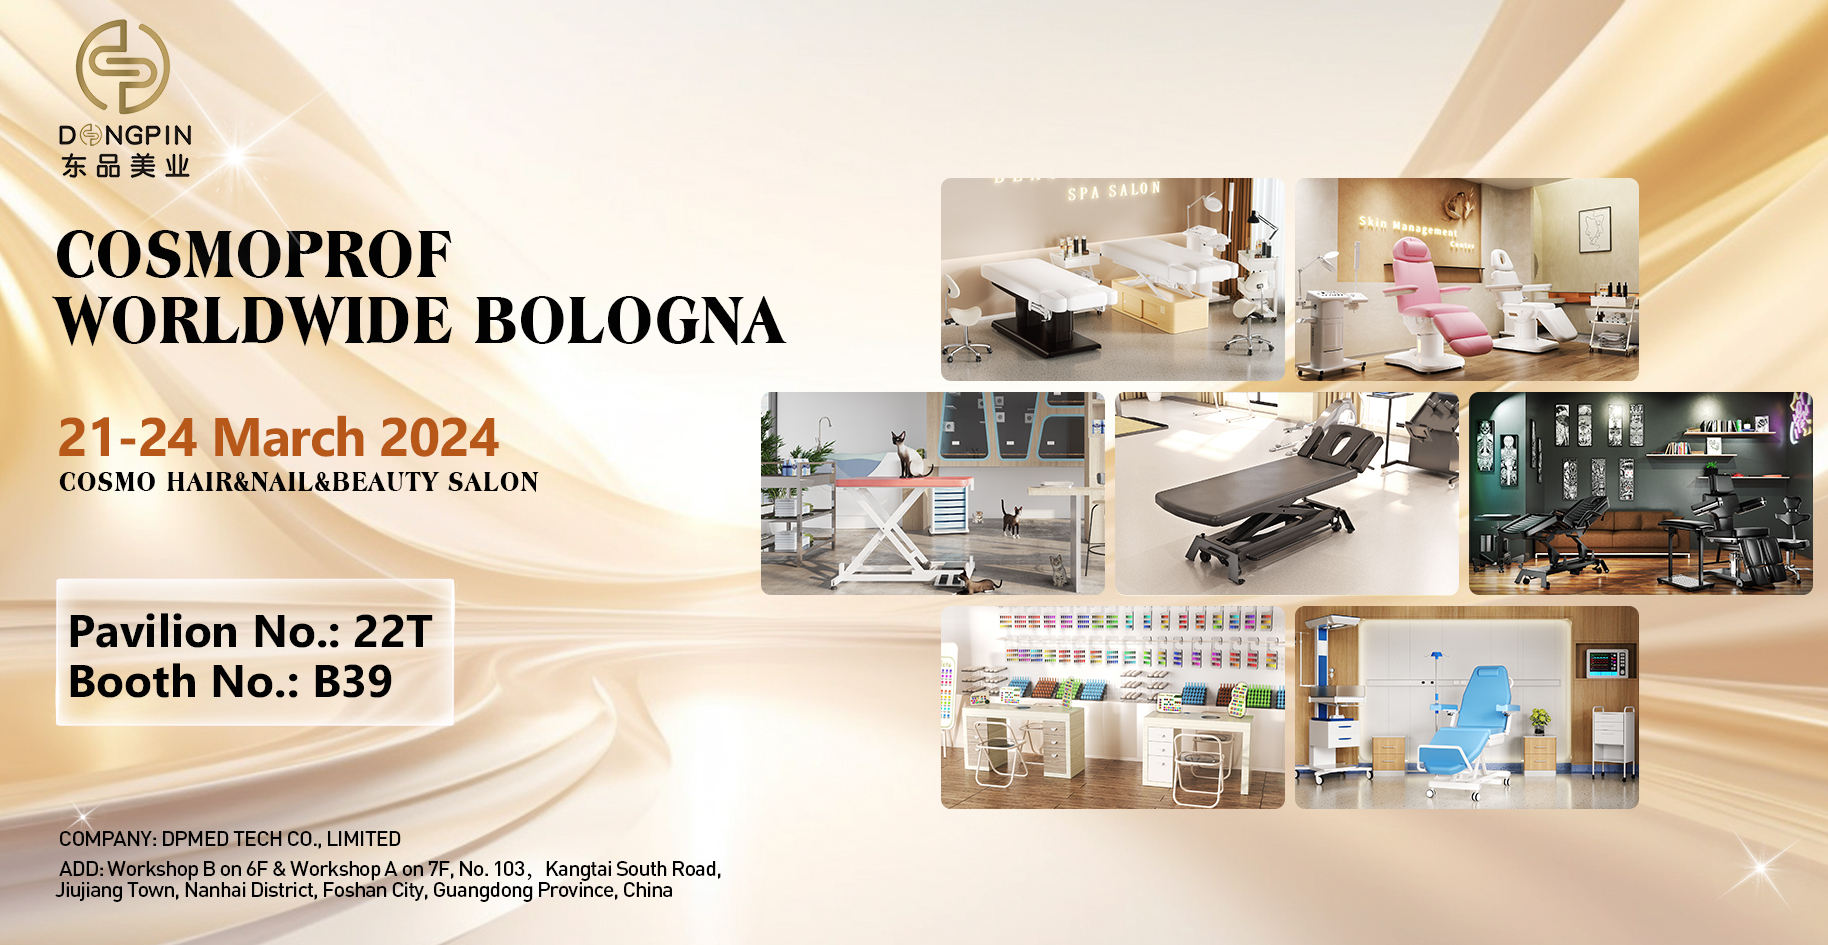 Experience the Fusion of Beauty and Innovation at Cosmoprof Bologna 2024 with DongPin